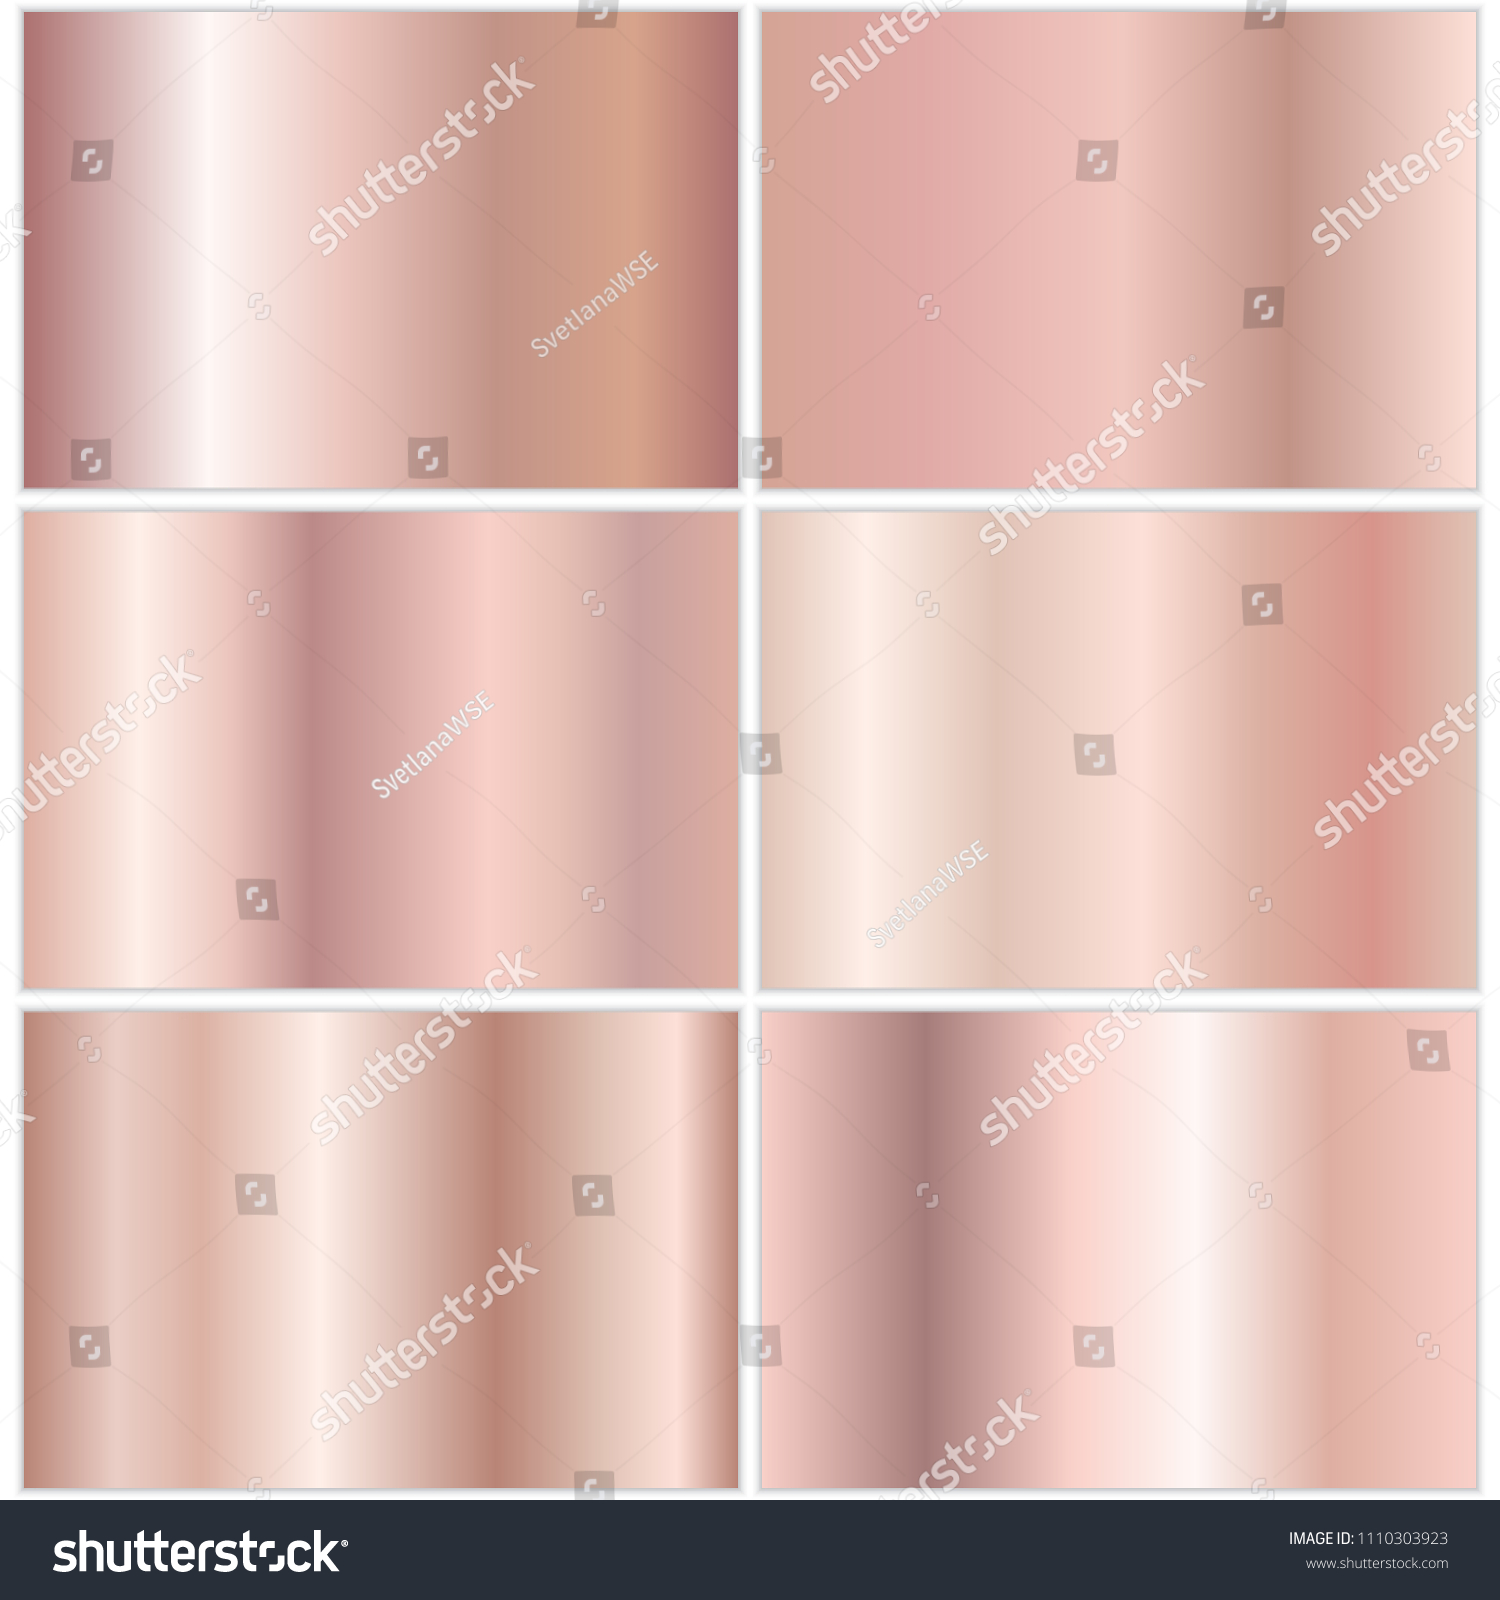 SVG of Collection of backgrounds with a metallic gradient. Brilliant plates with rose gold effect svg